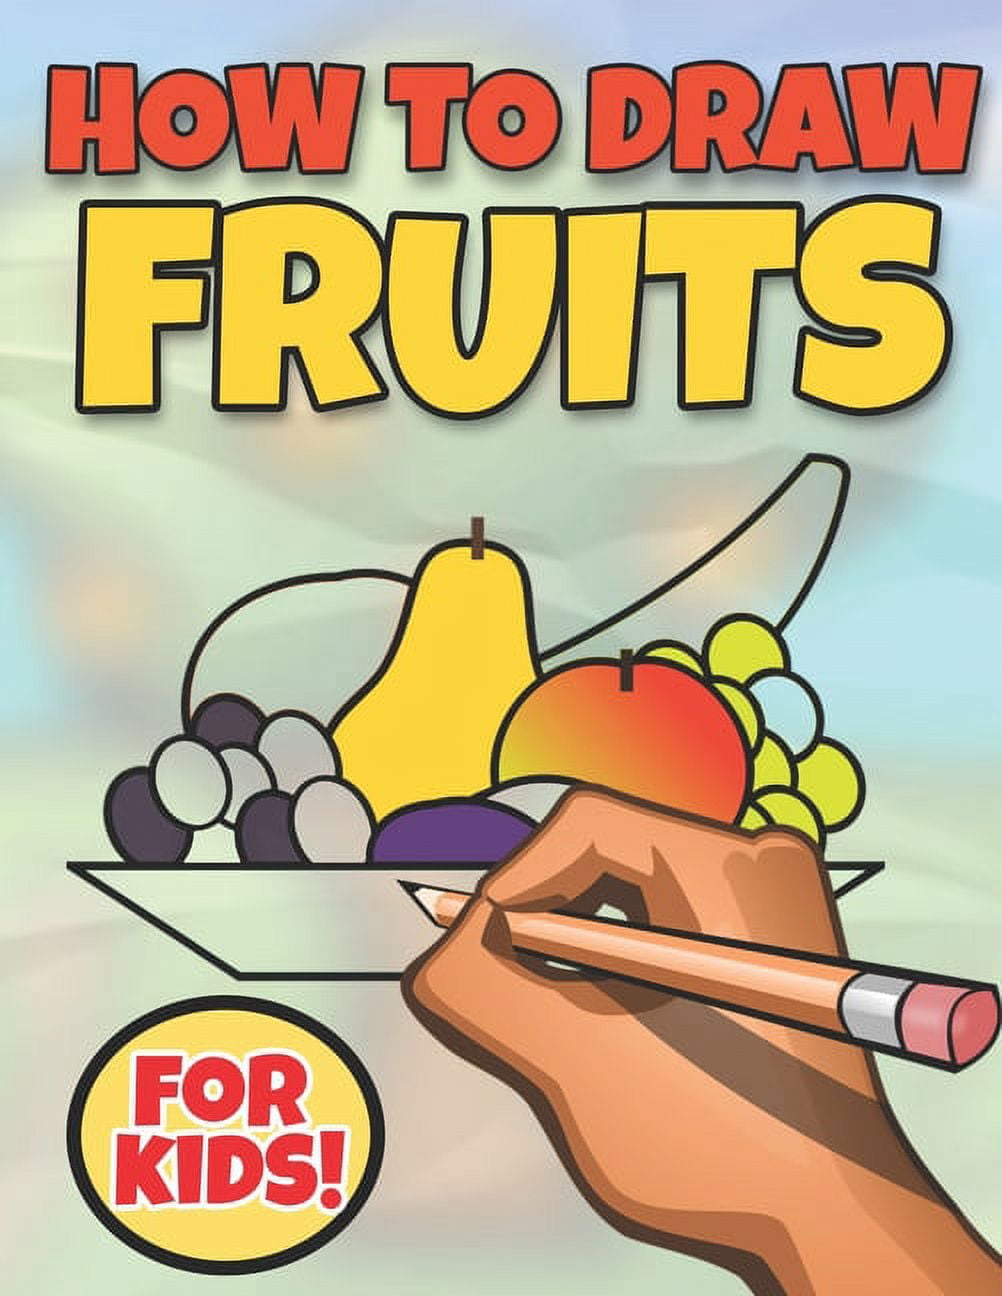 Easy Fruit Drawings- How To Draw and Paint An Apple, Banana, Orange